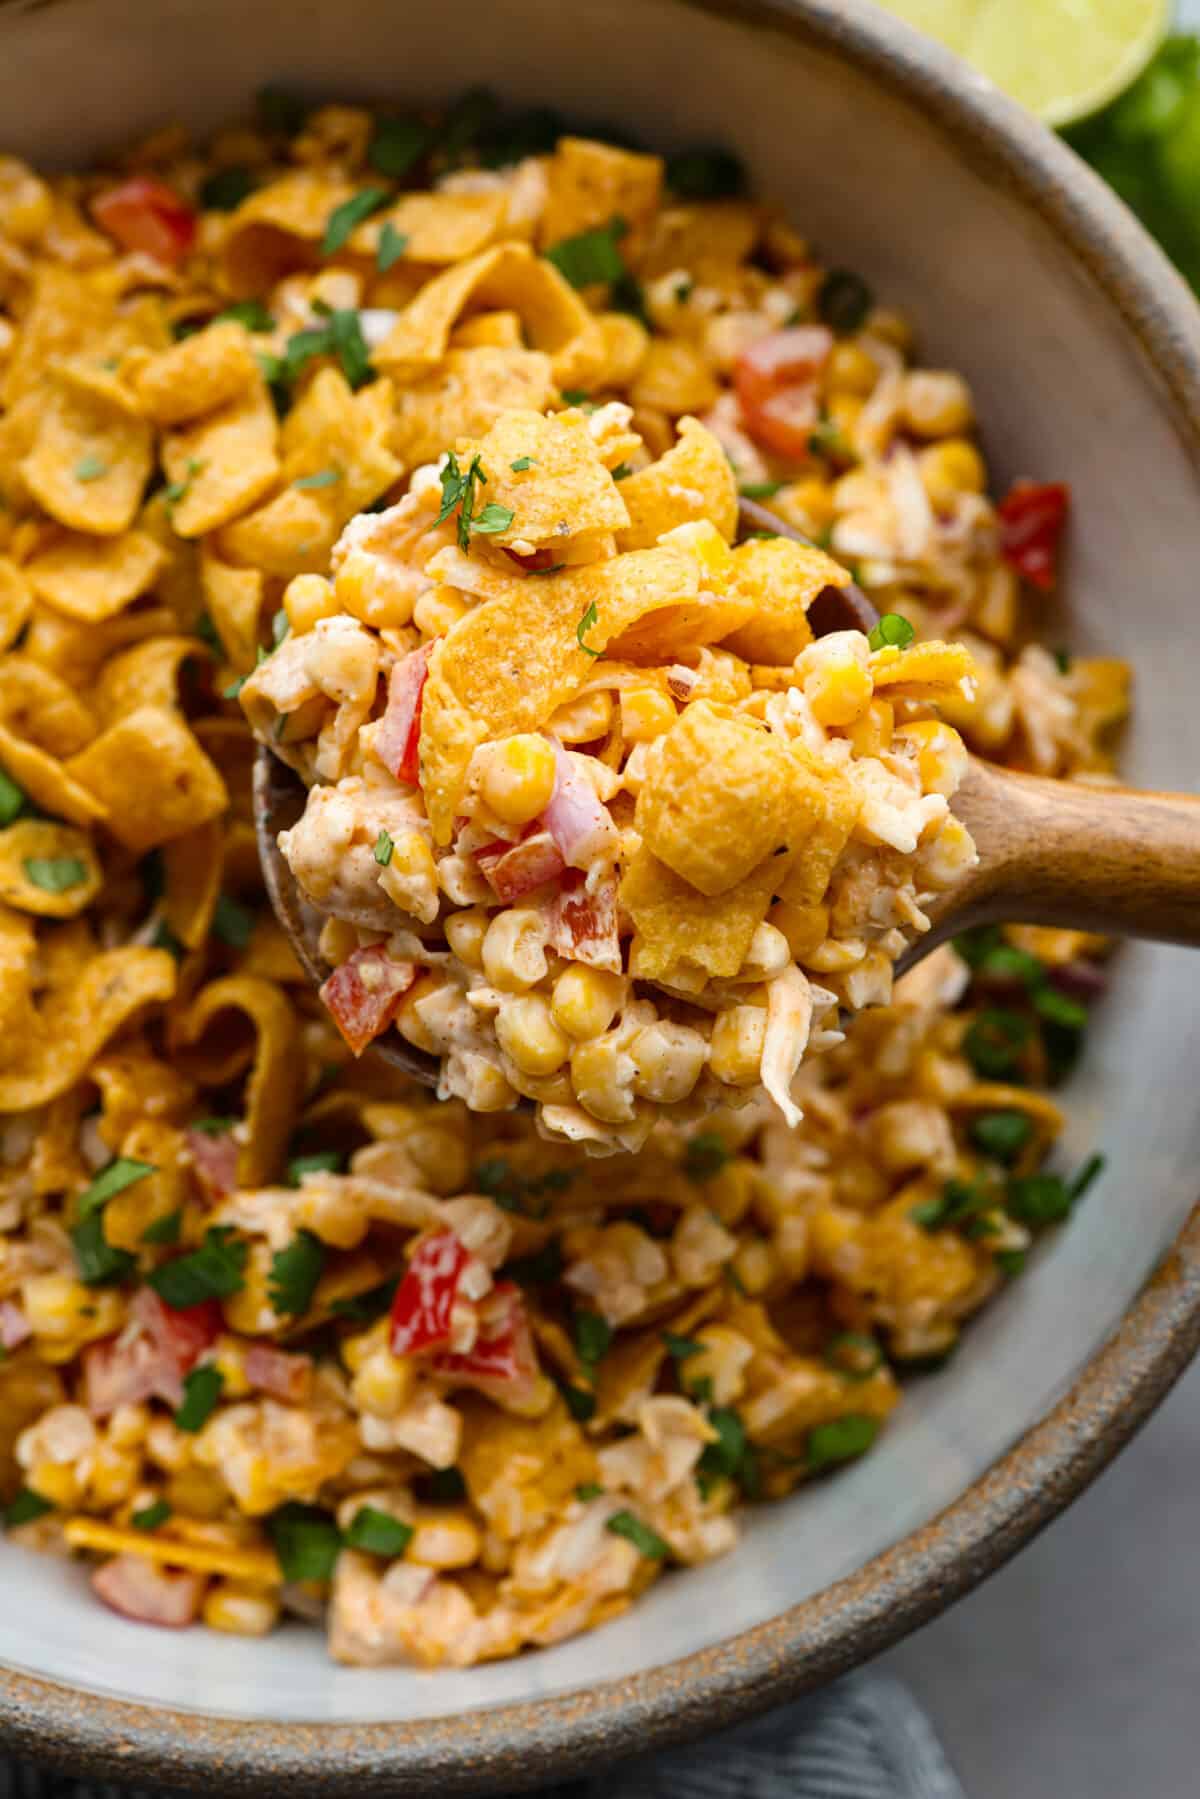 Close view of frito corn salad in a bowl. A wood spoon is lifting up a scoop of salad.